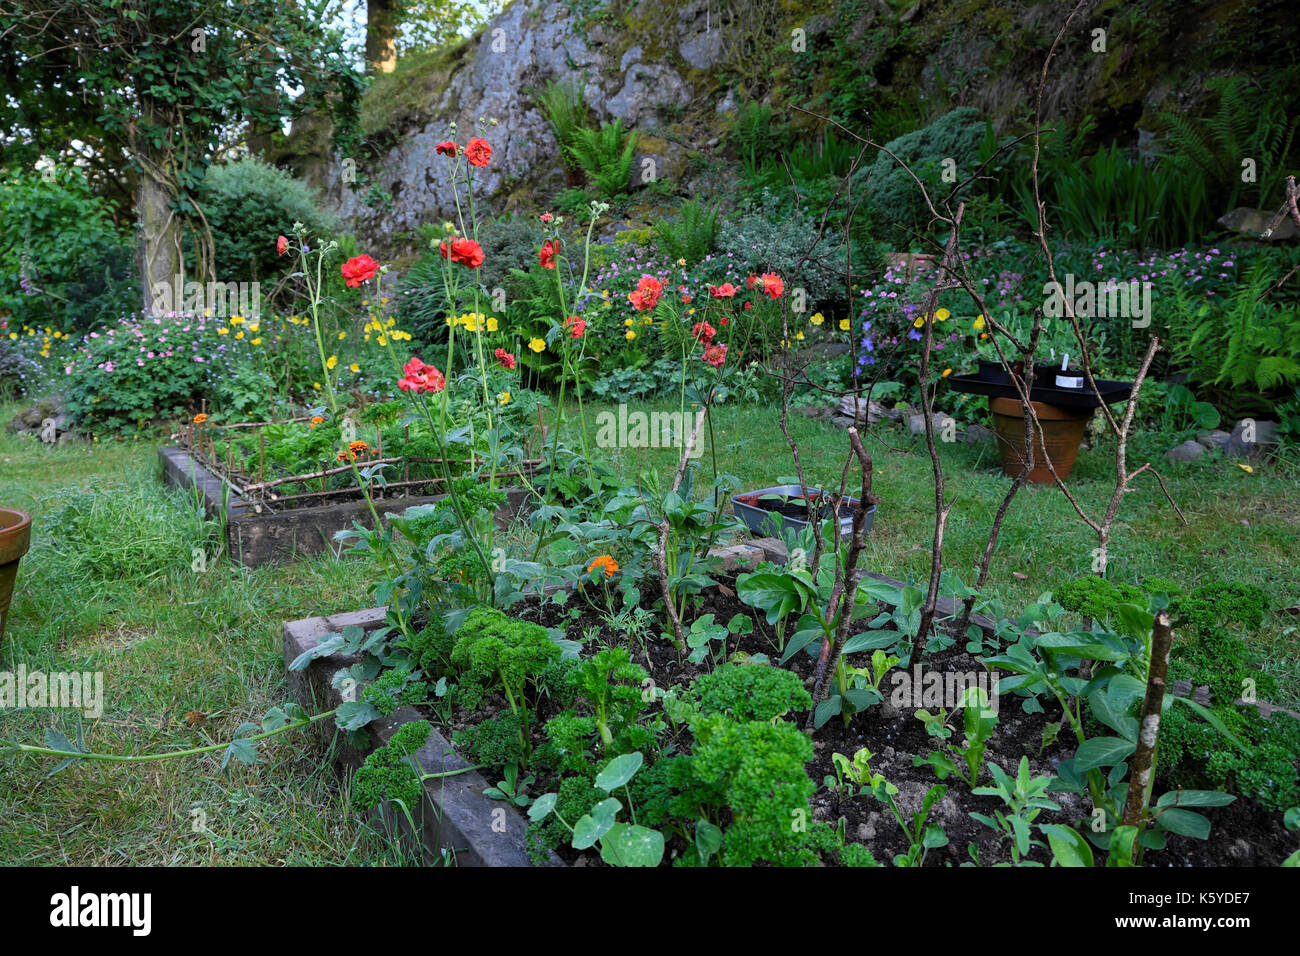 Small country cottage garden with red geum Mrs Bradshaw plants  Welsh poppies, parsley & broad beans growing in raised bed beds Wales UK  KATHY DEWITT Stock Photo